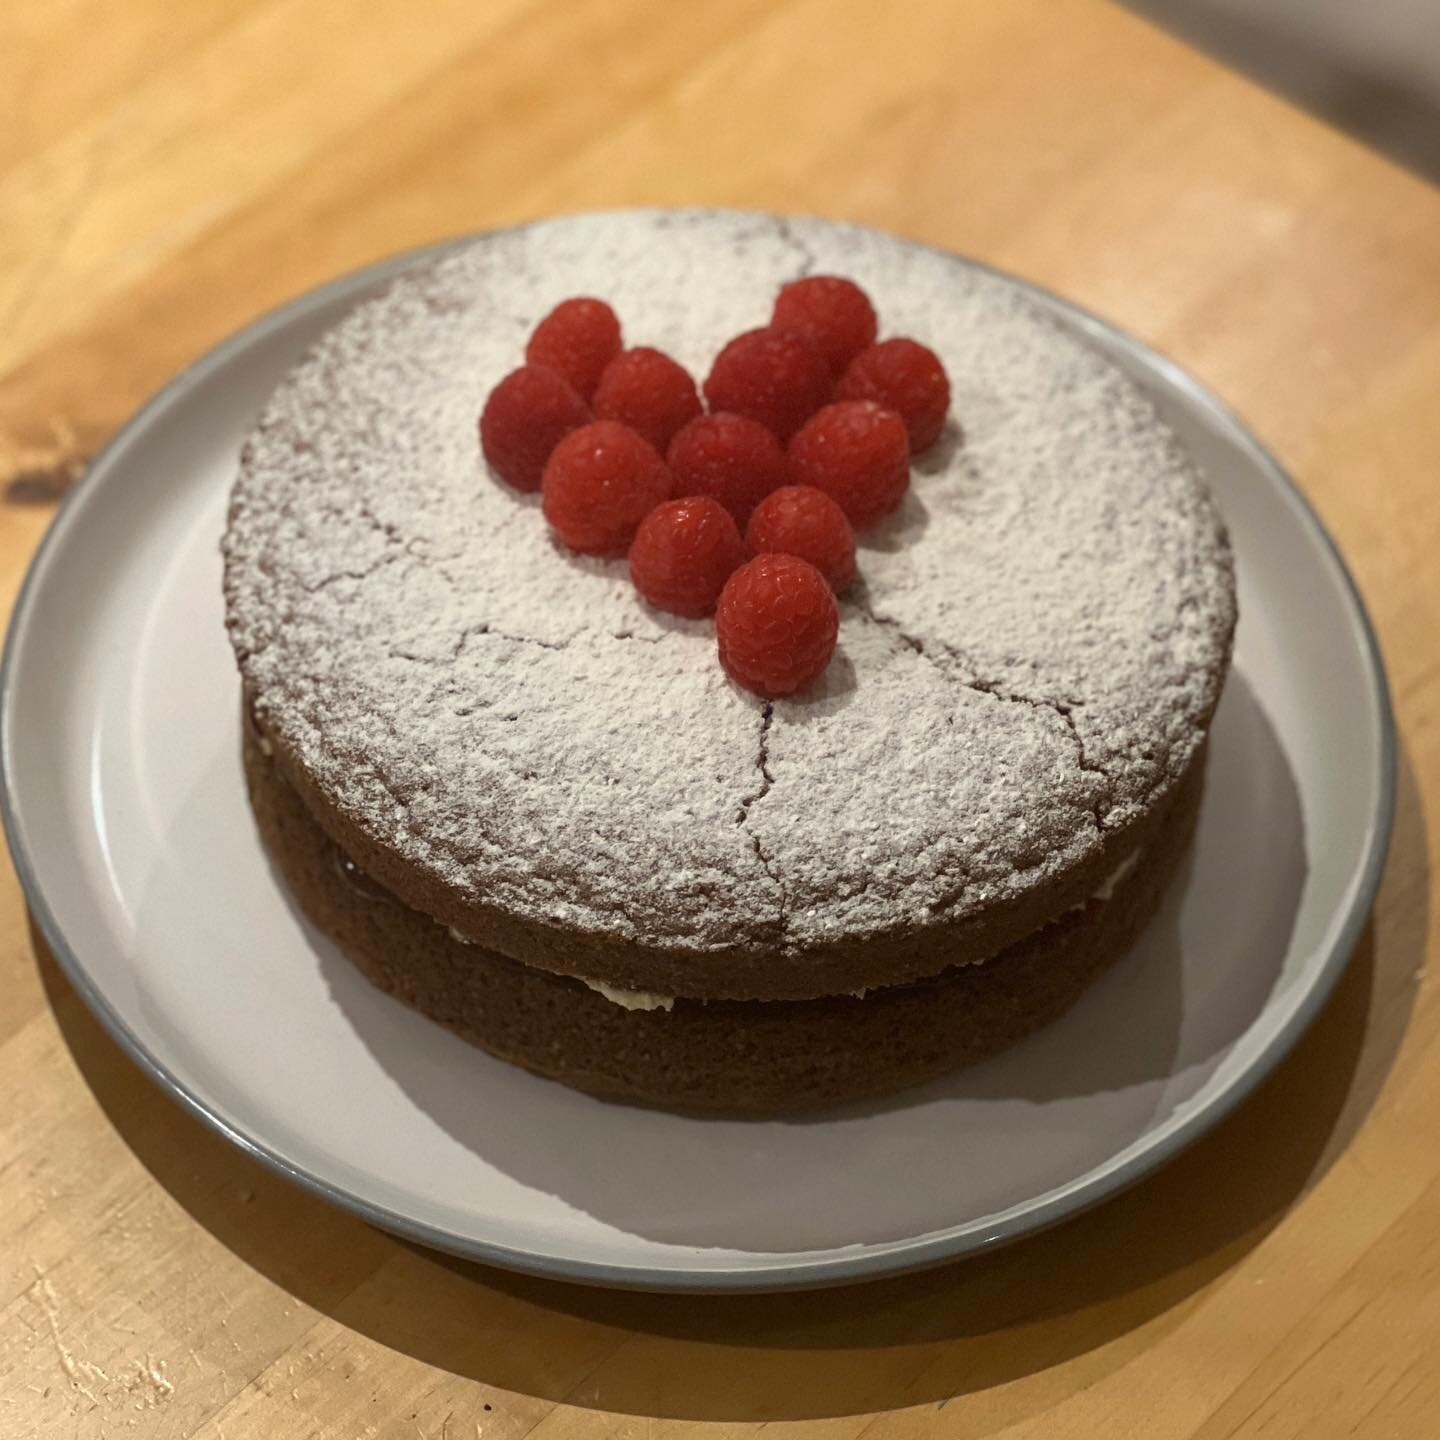 Back to bake-sics today with a vegan take on the Victoria Sponge 🍰 Had a near miss cake-tastrophe when the top layer nearly crumbled into many pieces when I flipped it over but that&rsquo;s a secret. Shhh. 

🍰

🍰

🍰

🍰

🍰

🍰

🍰

🍰

🍰

#vega